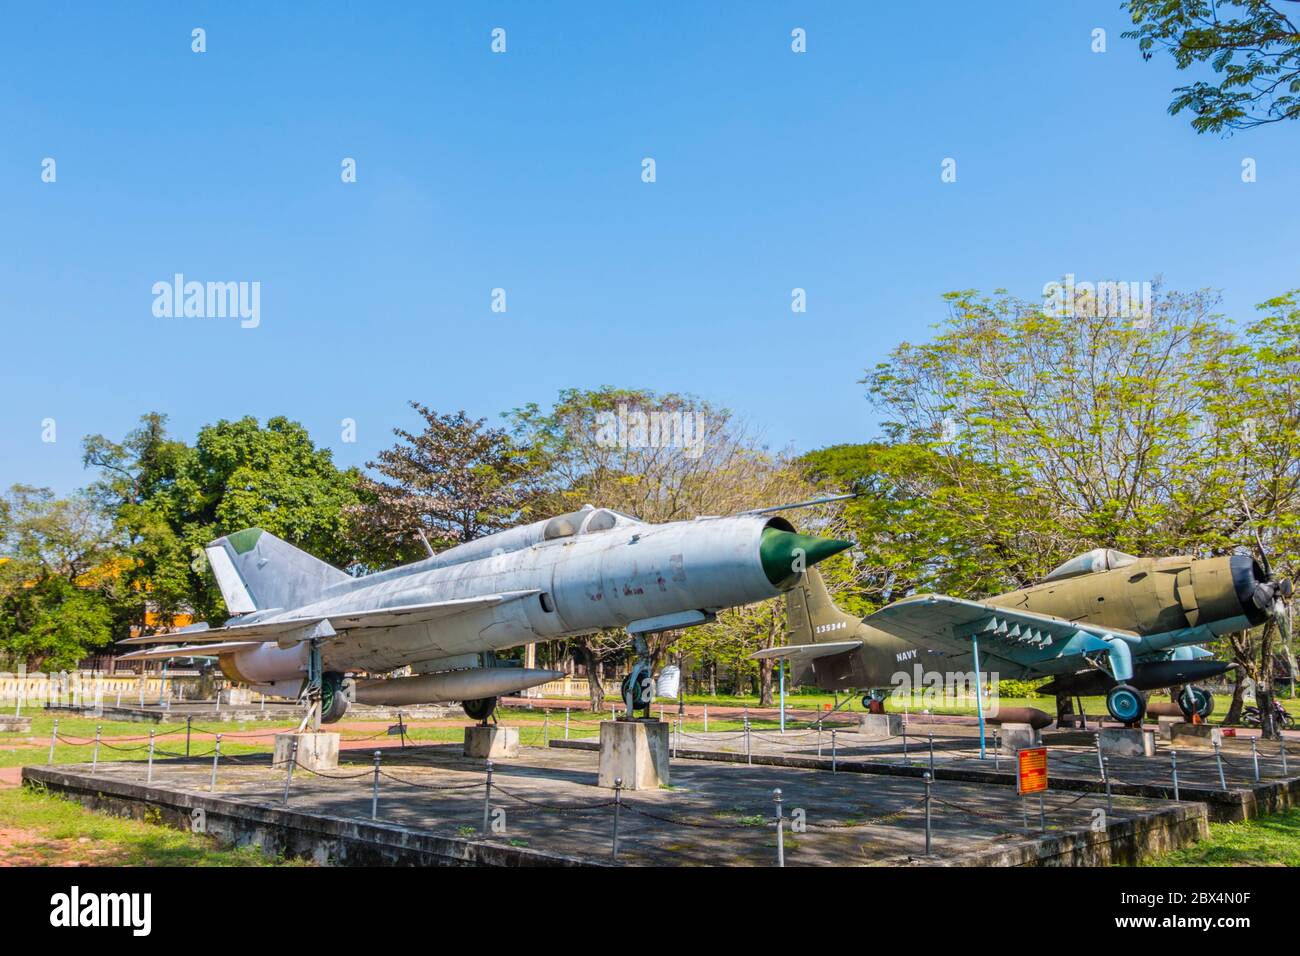 MIG-21 jet plane used by Vietnam resistance army and AD-6 US aircraft in background, Thua Thien Hue History Museum, Hue War Museum, Hue, Vietnam Stock Photo